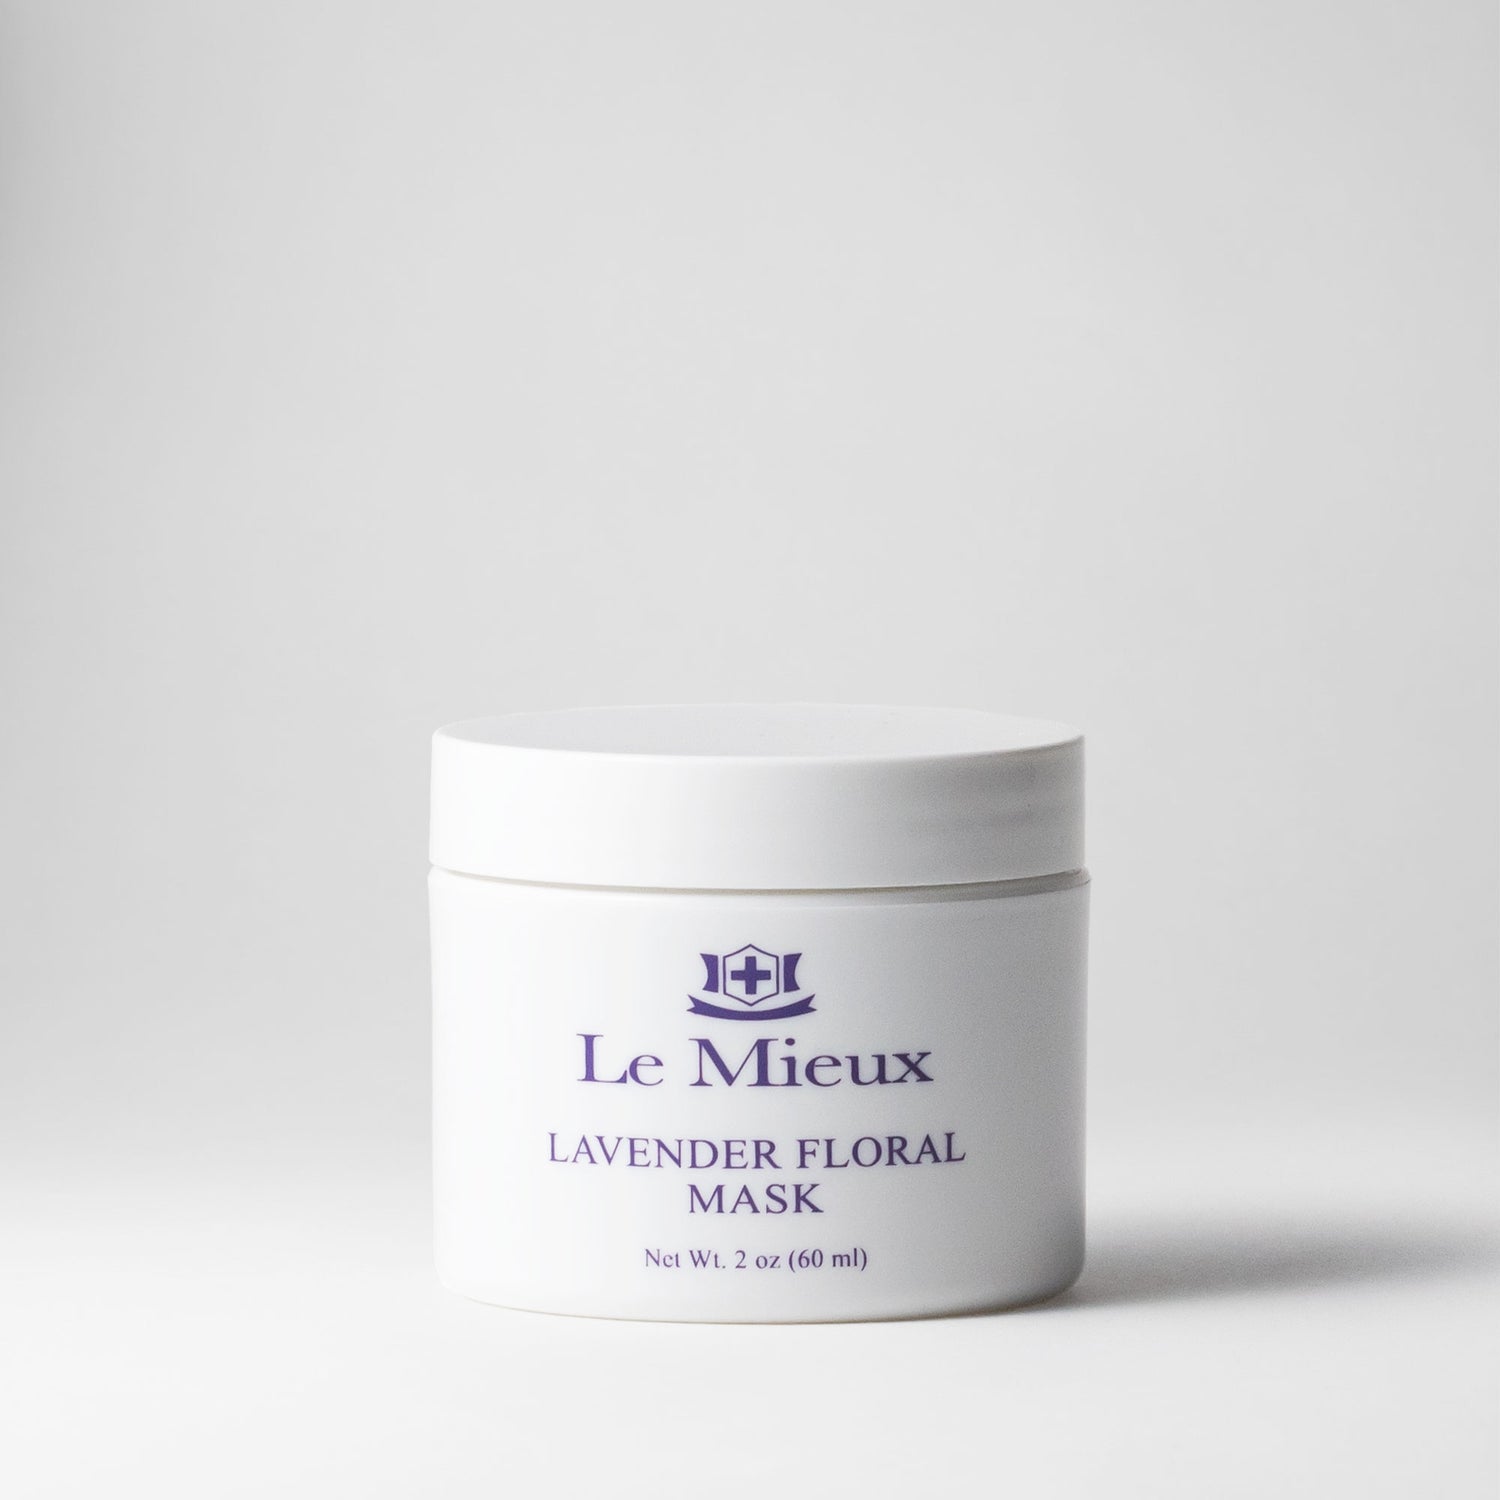  LAVENDER FLORAL MASK from Le Mieux Skincare - 1